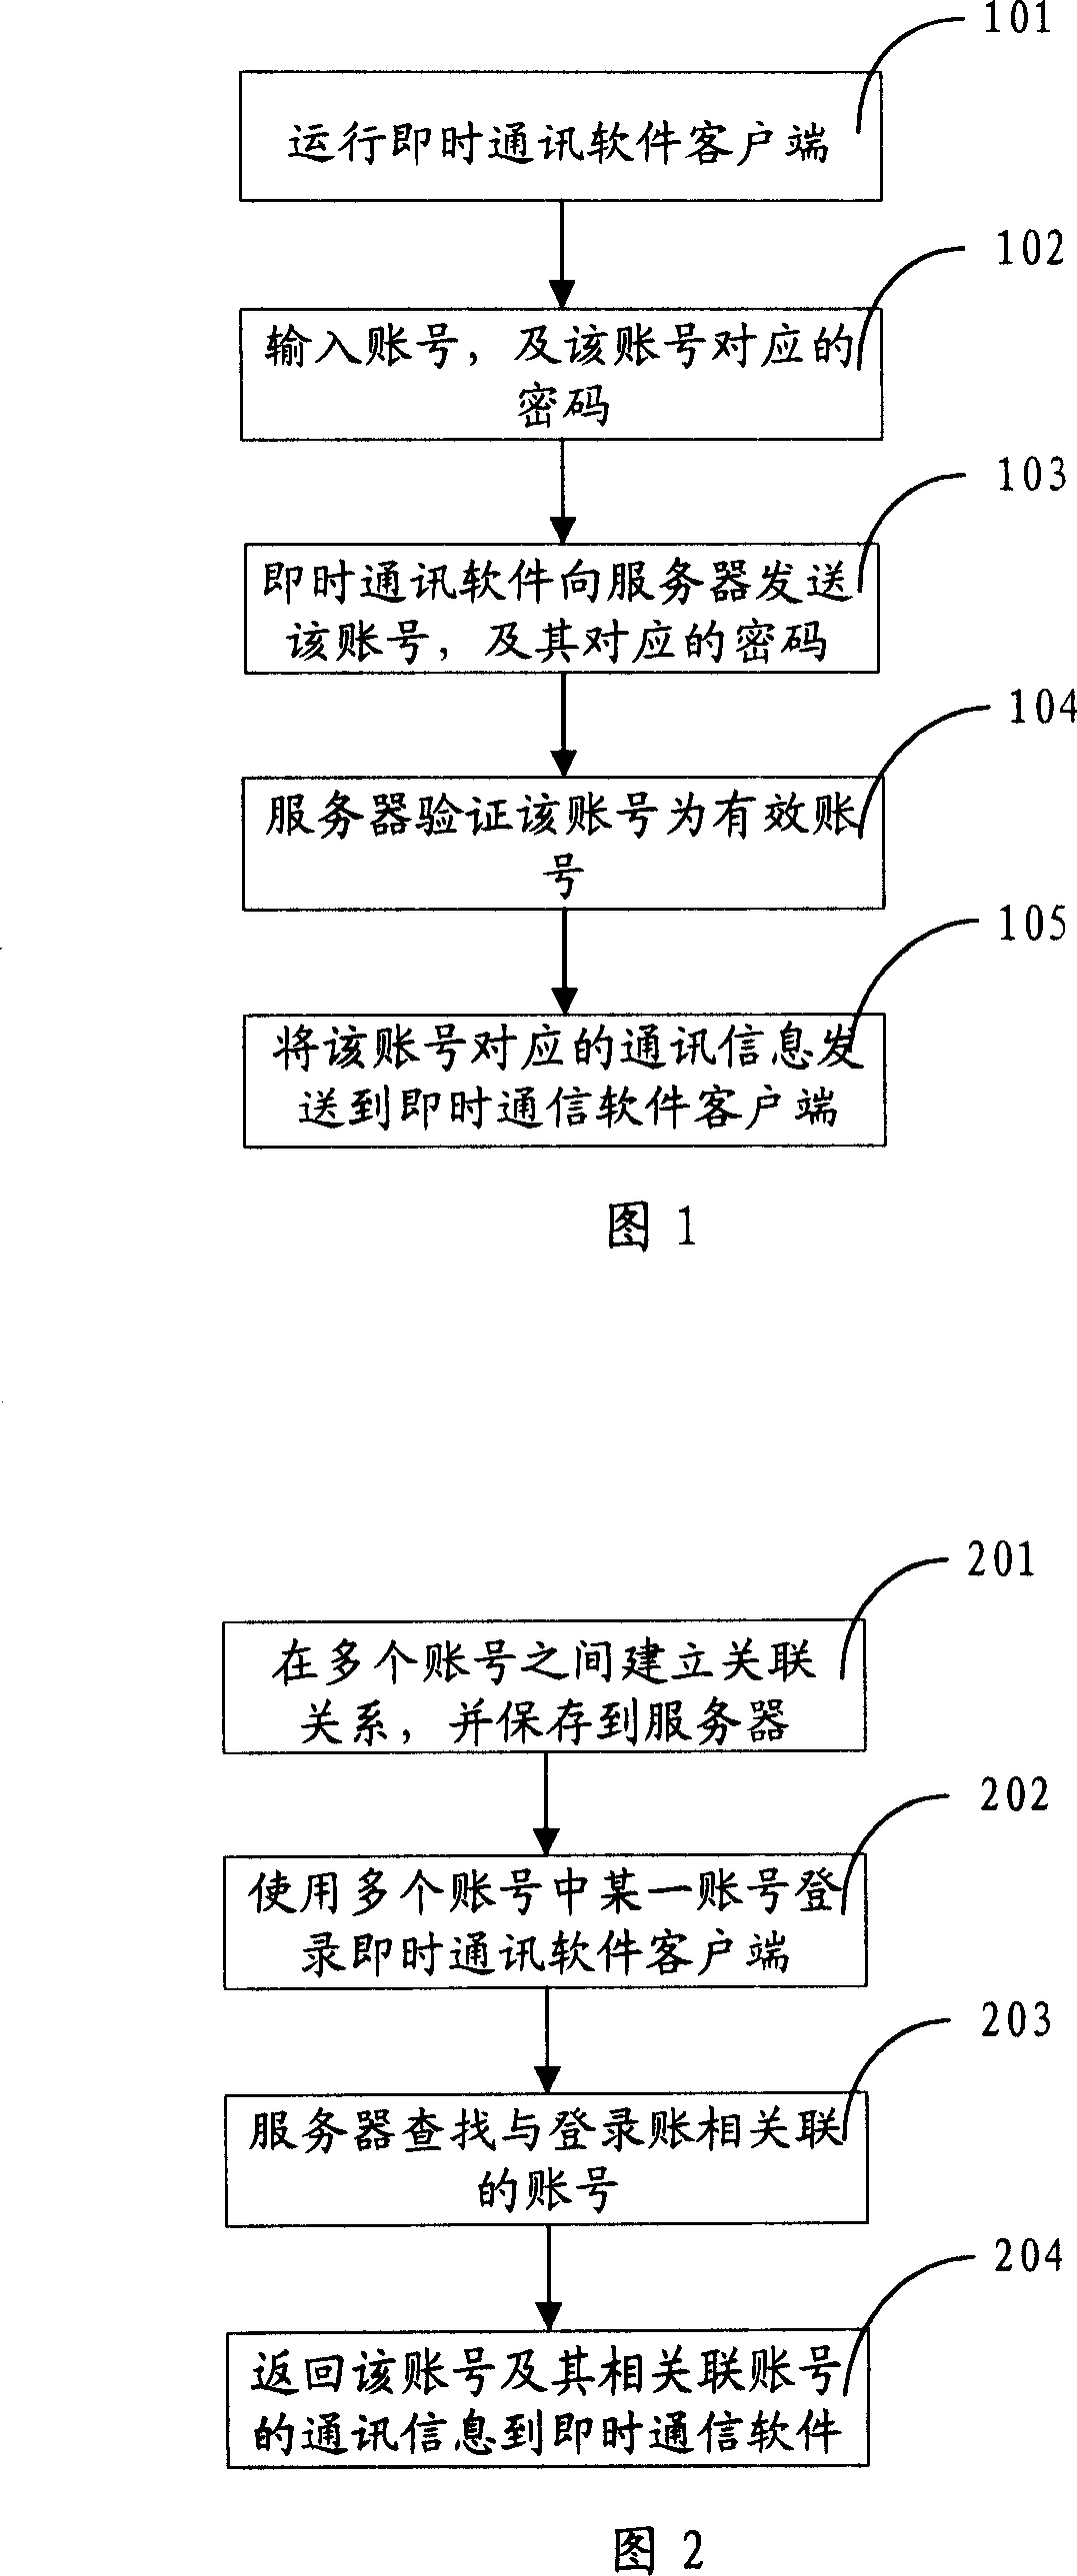 Method and system for multi-account log-in instant communication software